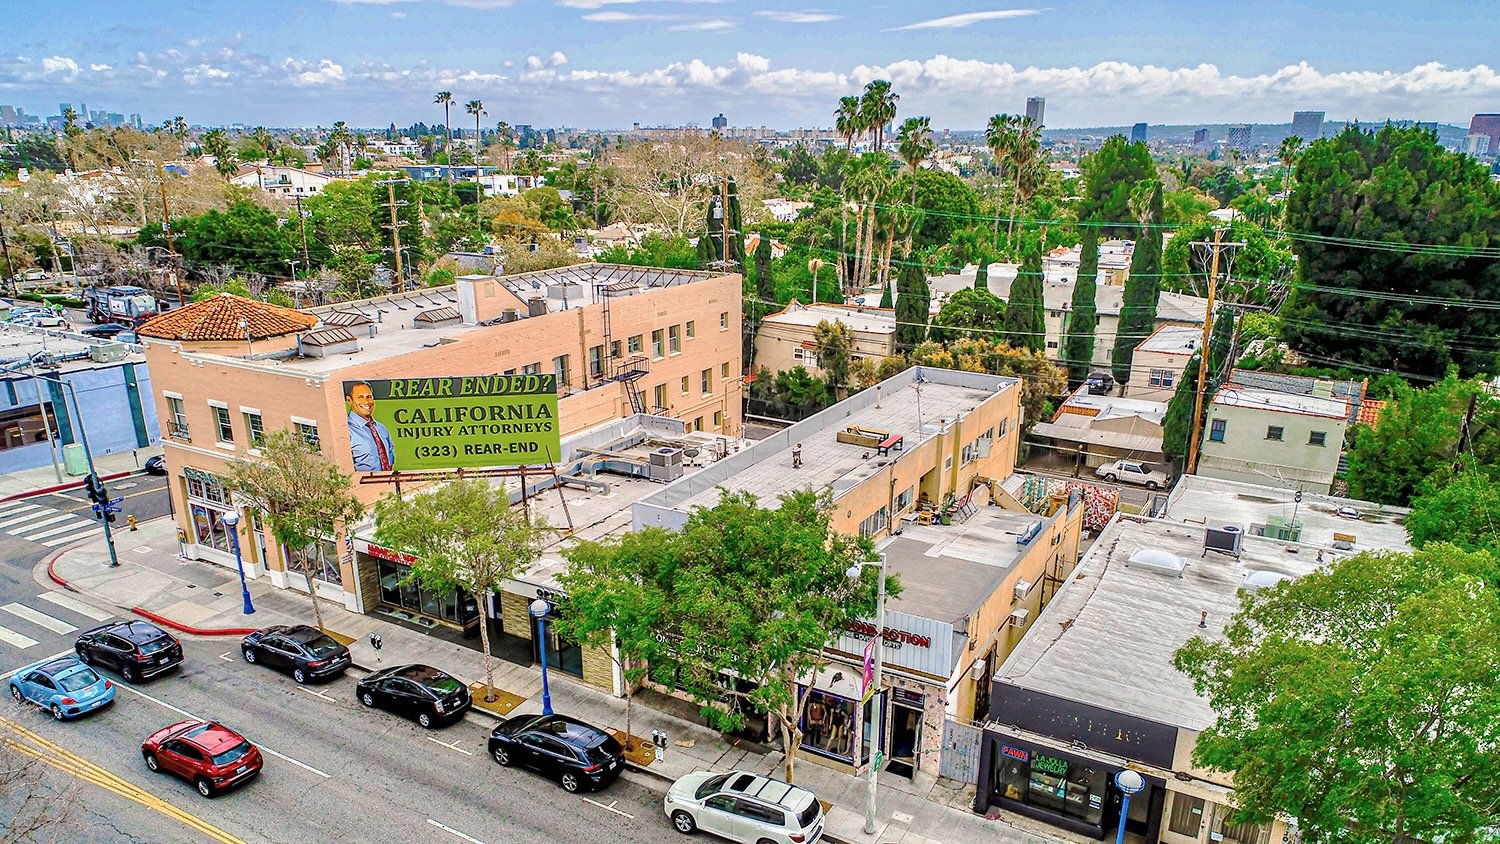 Elevated view of a commercial street with a large attorney billboard 3